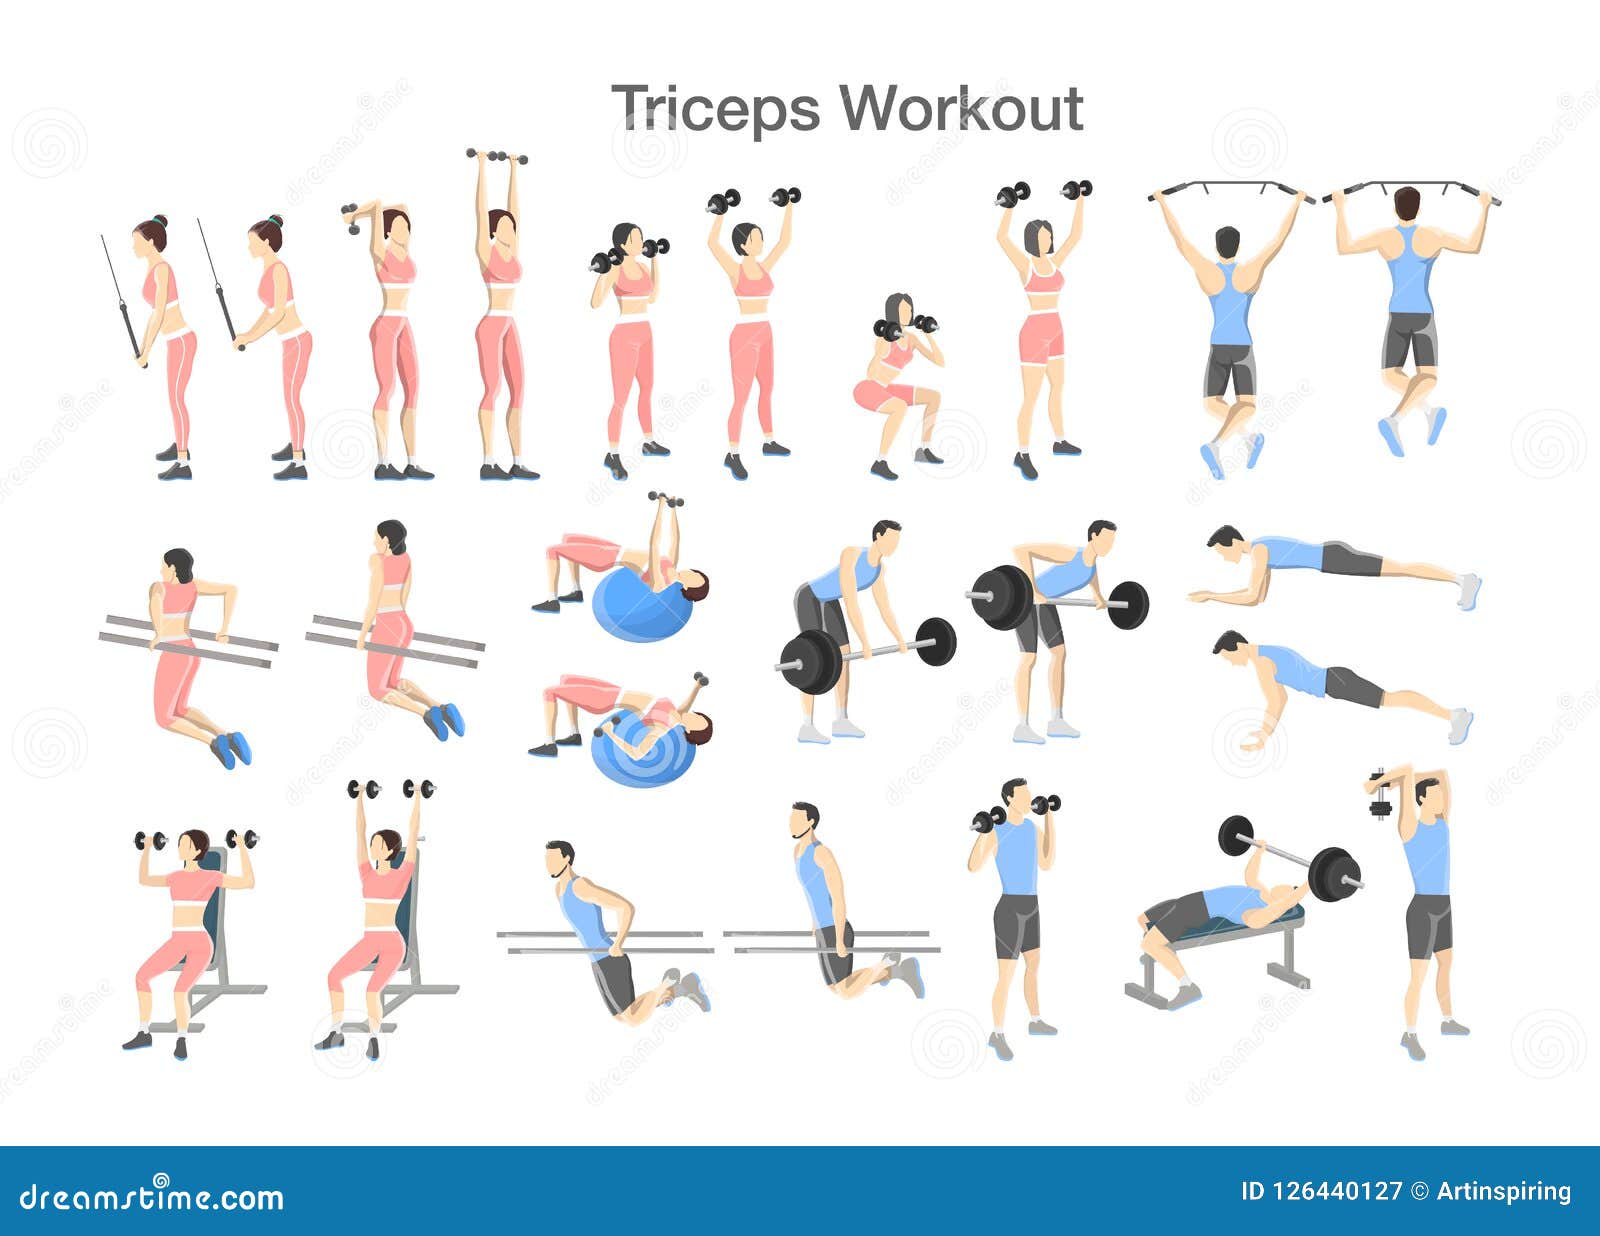 Simple Chest And Triceps Workout With Dumbbells And Barbell for push your ABS